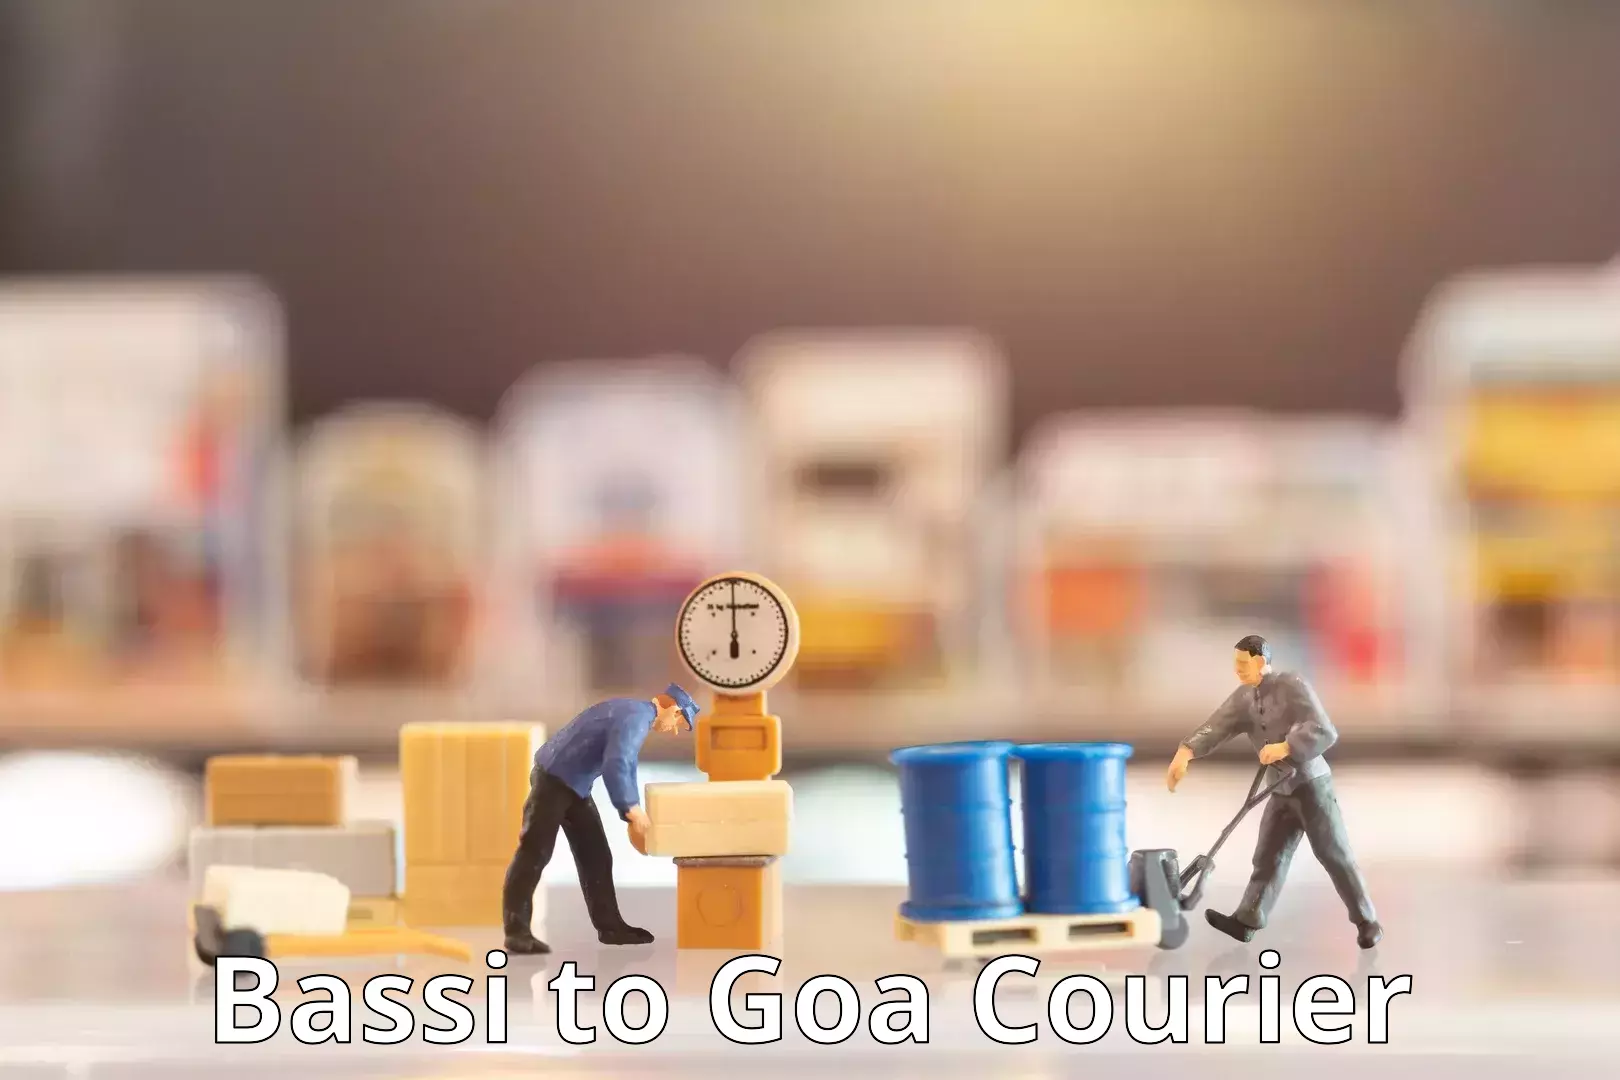 Nationwide delivery network Bassi to Goa